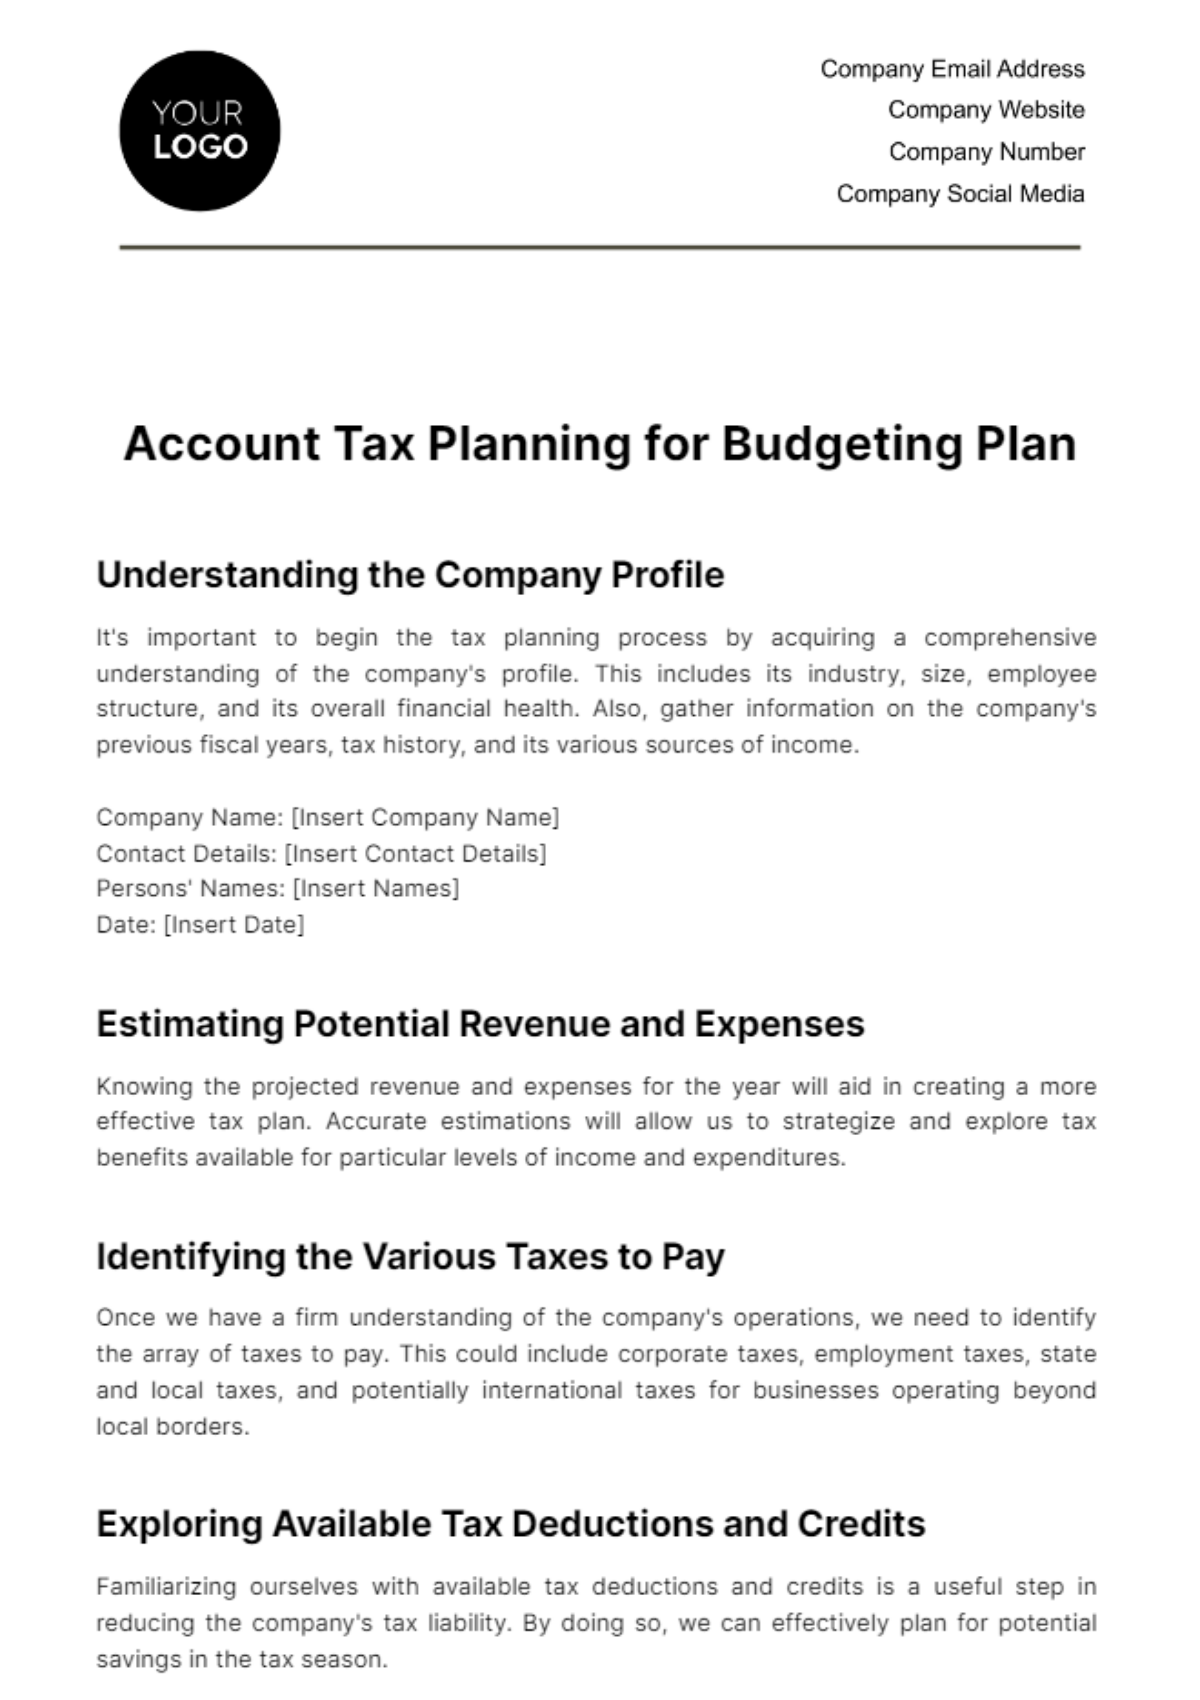 Account Tax Planning for Budgeting Template